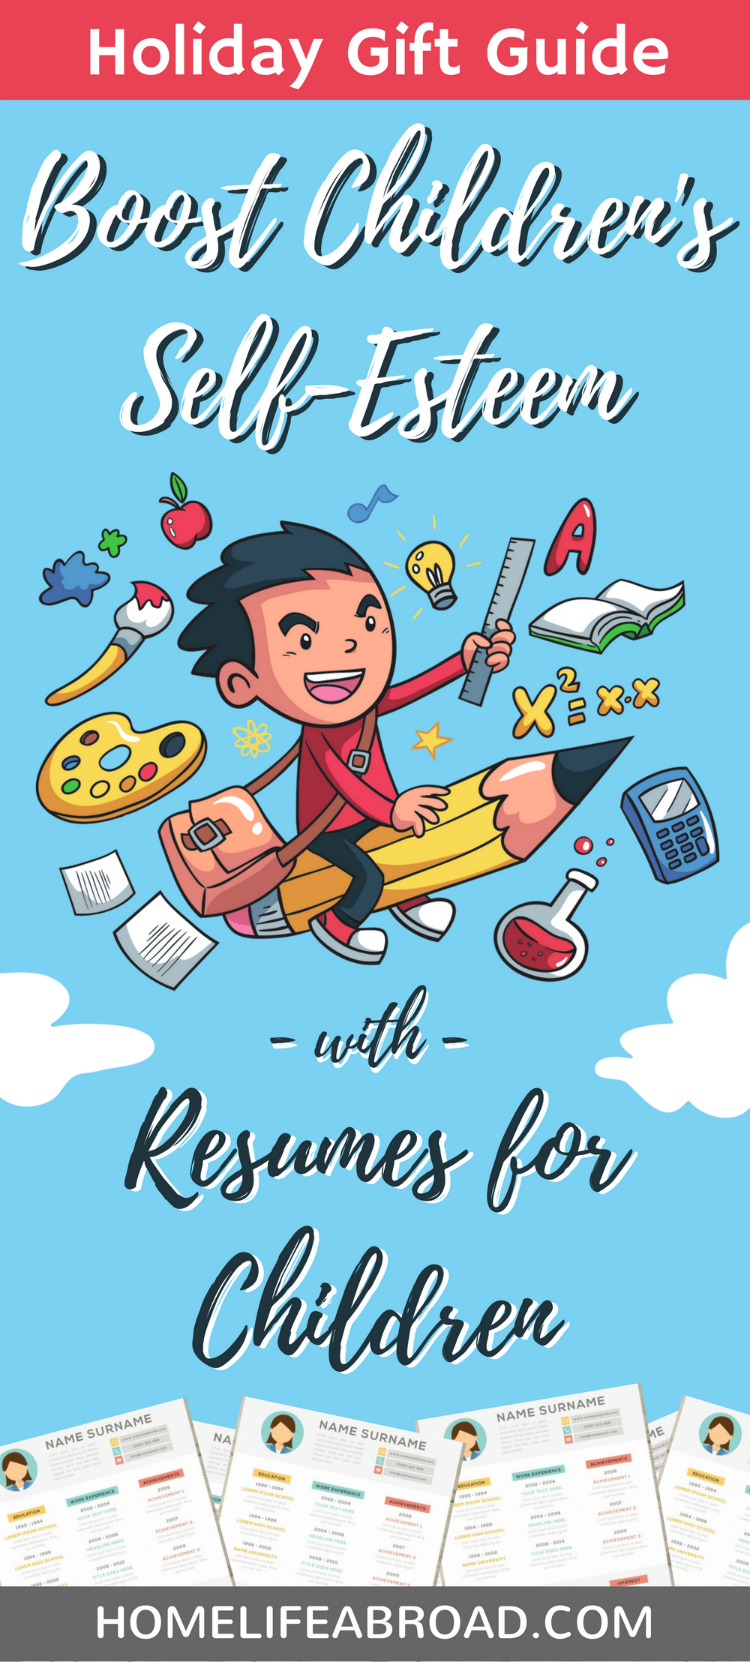 Looking for a creative gift for children that will improve their self-esteem? Here is the most unique holiday gift we have run across: Resumes for Children! With this sweet gift, help kids boost their self-esteem, praise their talents and skills and show them your appreciation and love. #ad #giftidea #holidaygiftguide #giftguide #education #selfesteem #children #childrensgifts